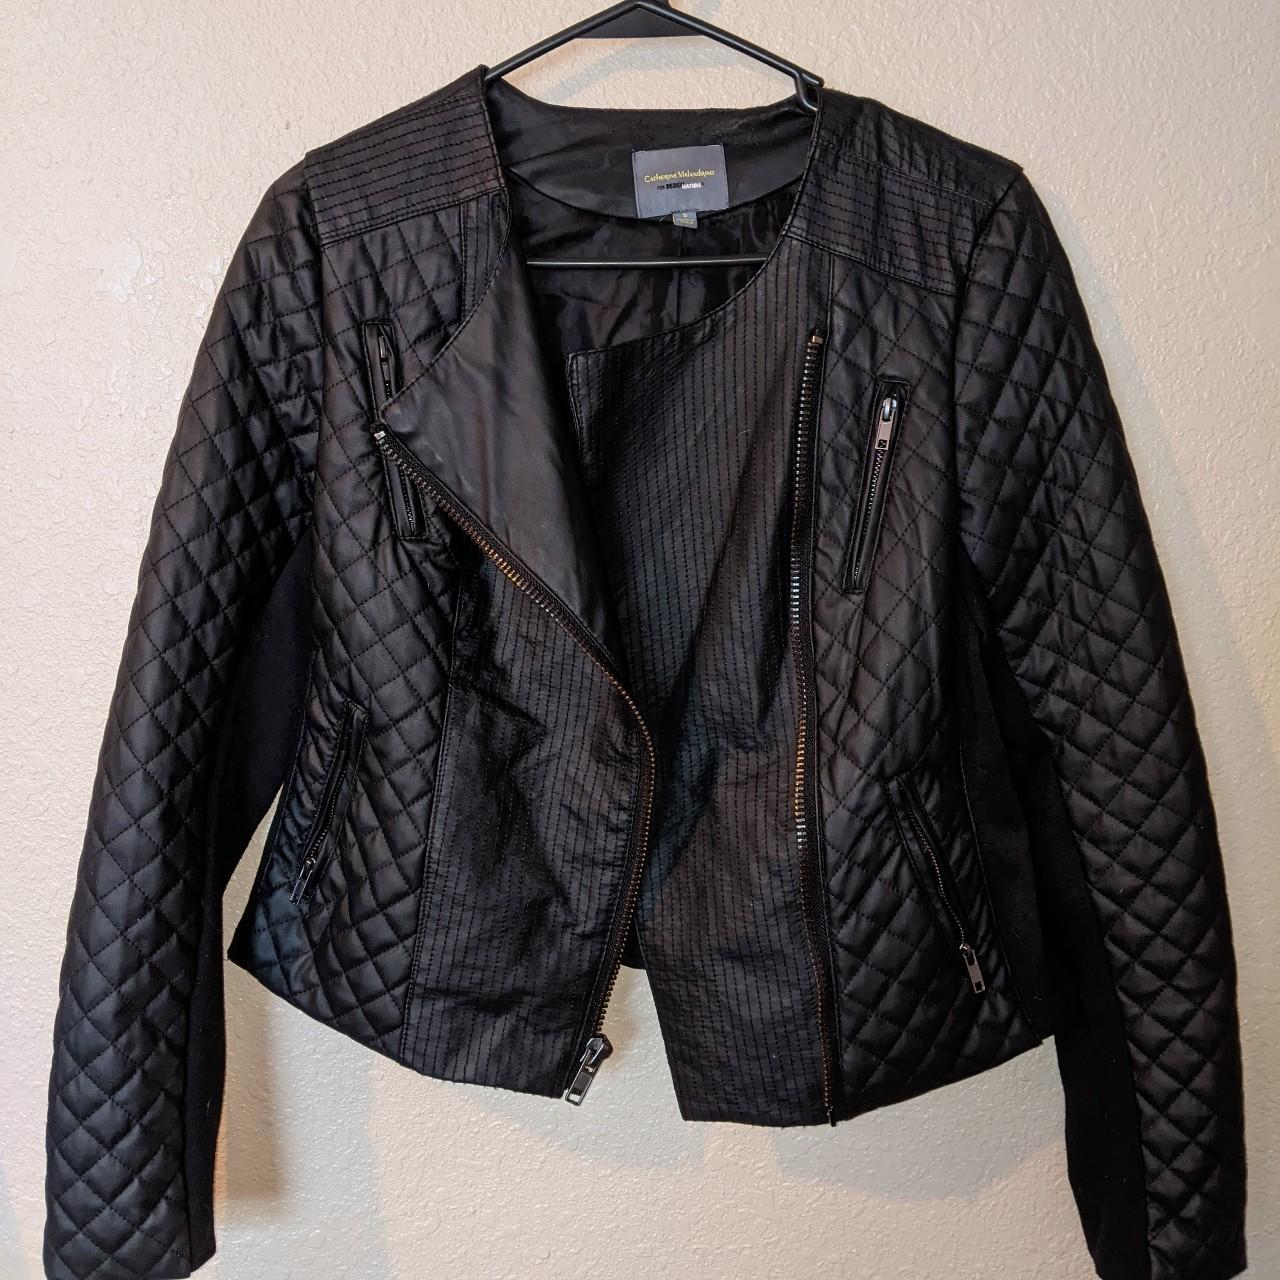 Product Image 1 - Leather Jacket

- Faux Leather
- Quilted